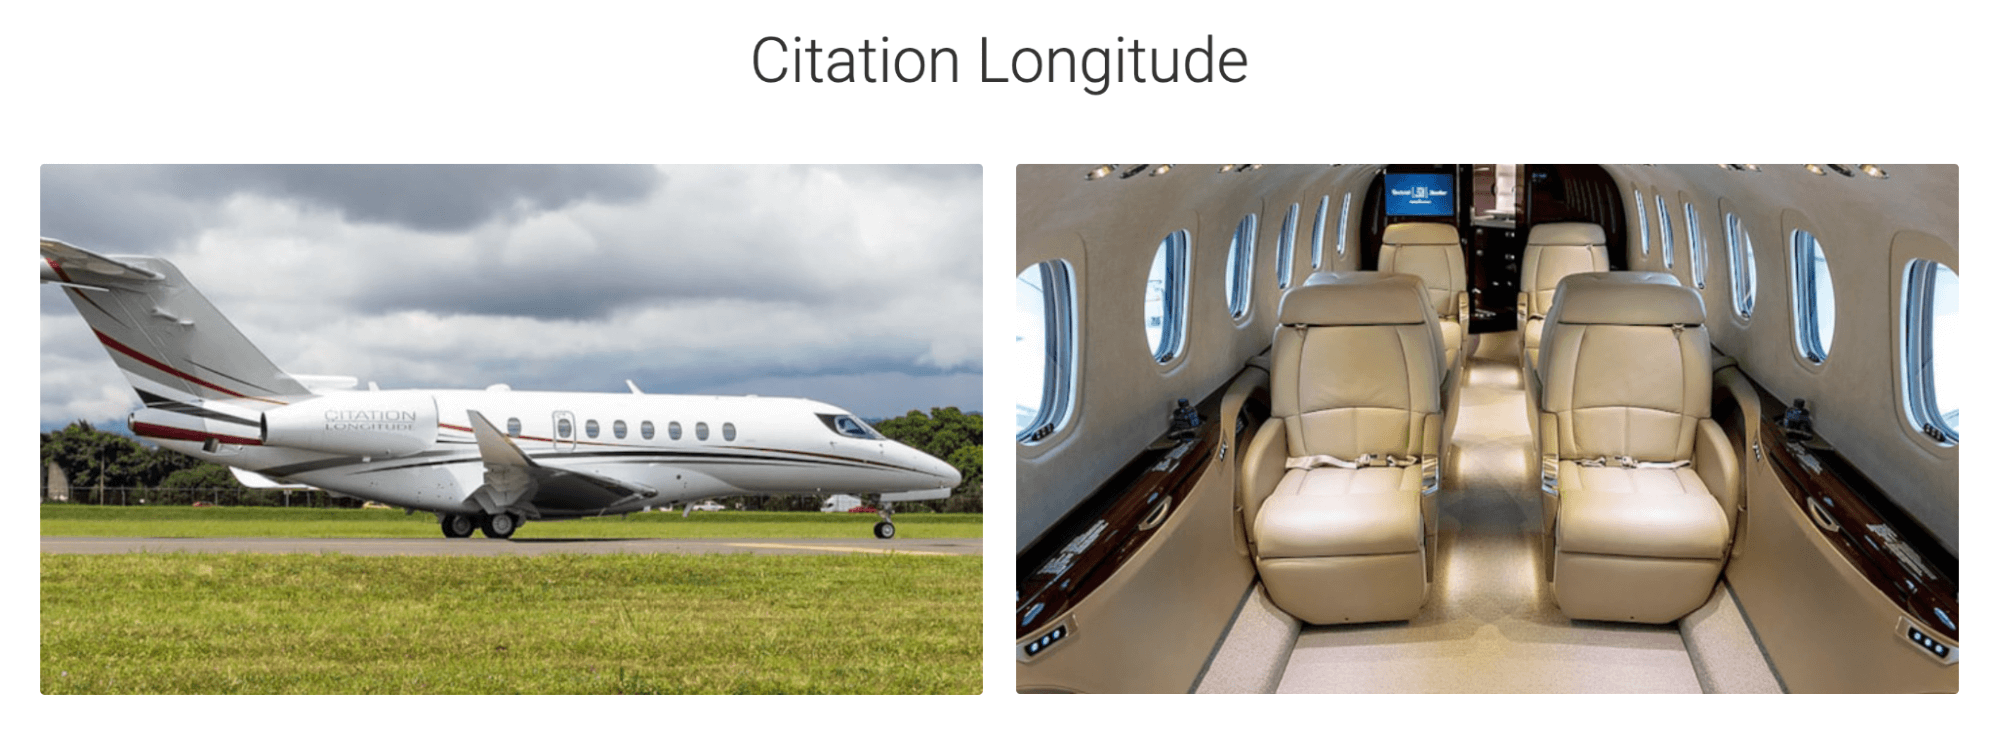 The picture shows the interior and exterior of Citation Longitude jets available from JetOptions.